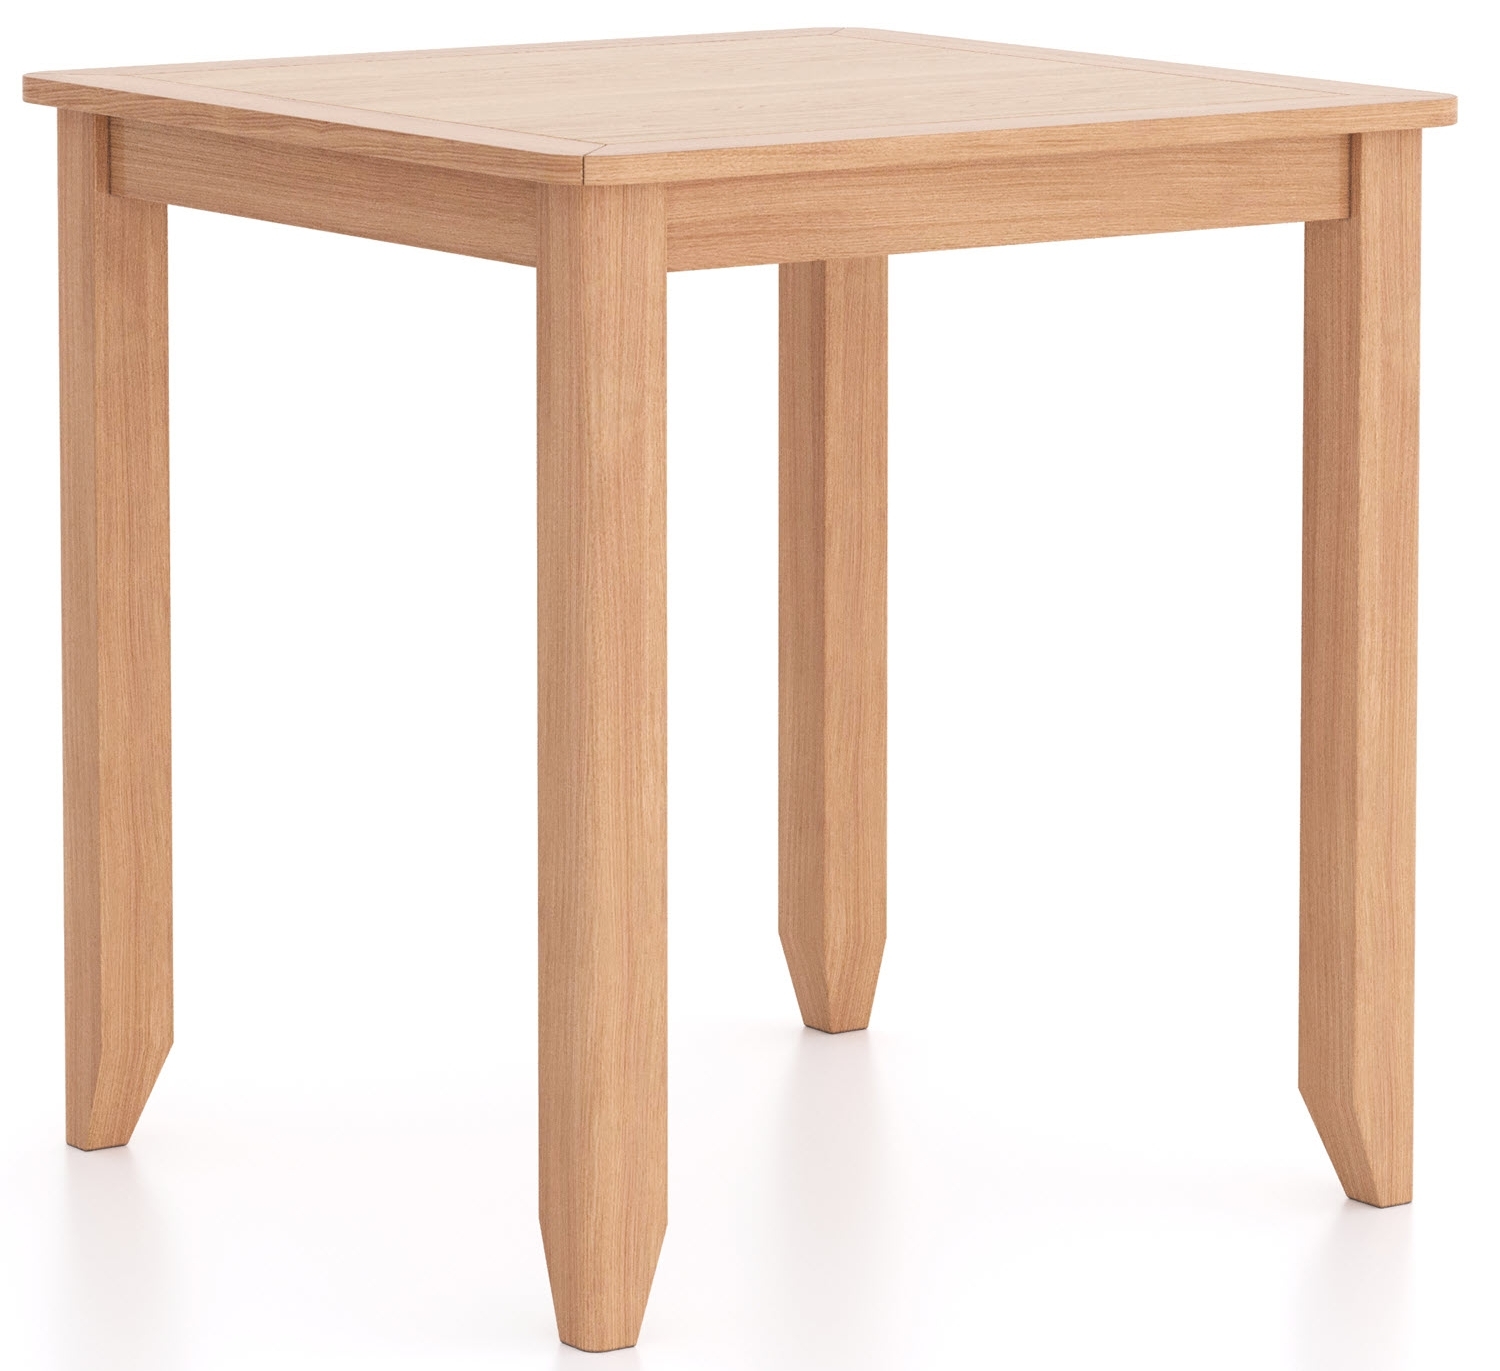 Arden Square Dining Table